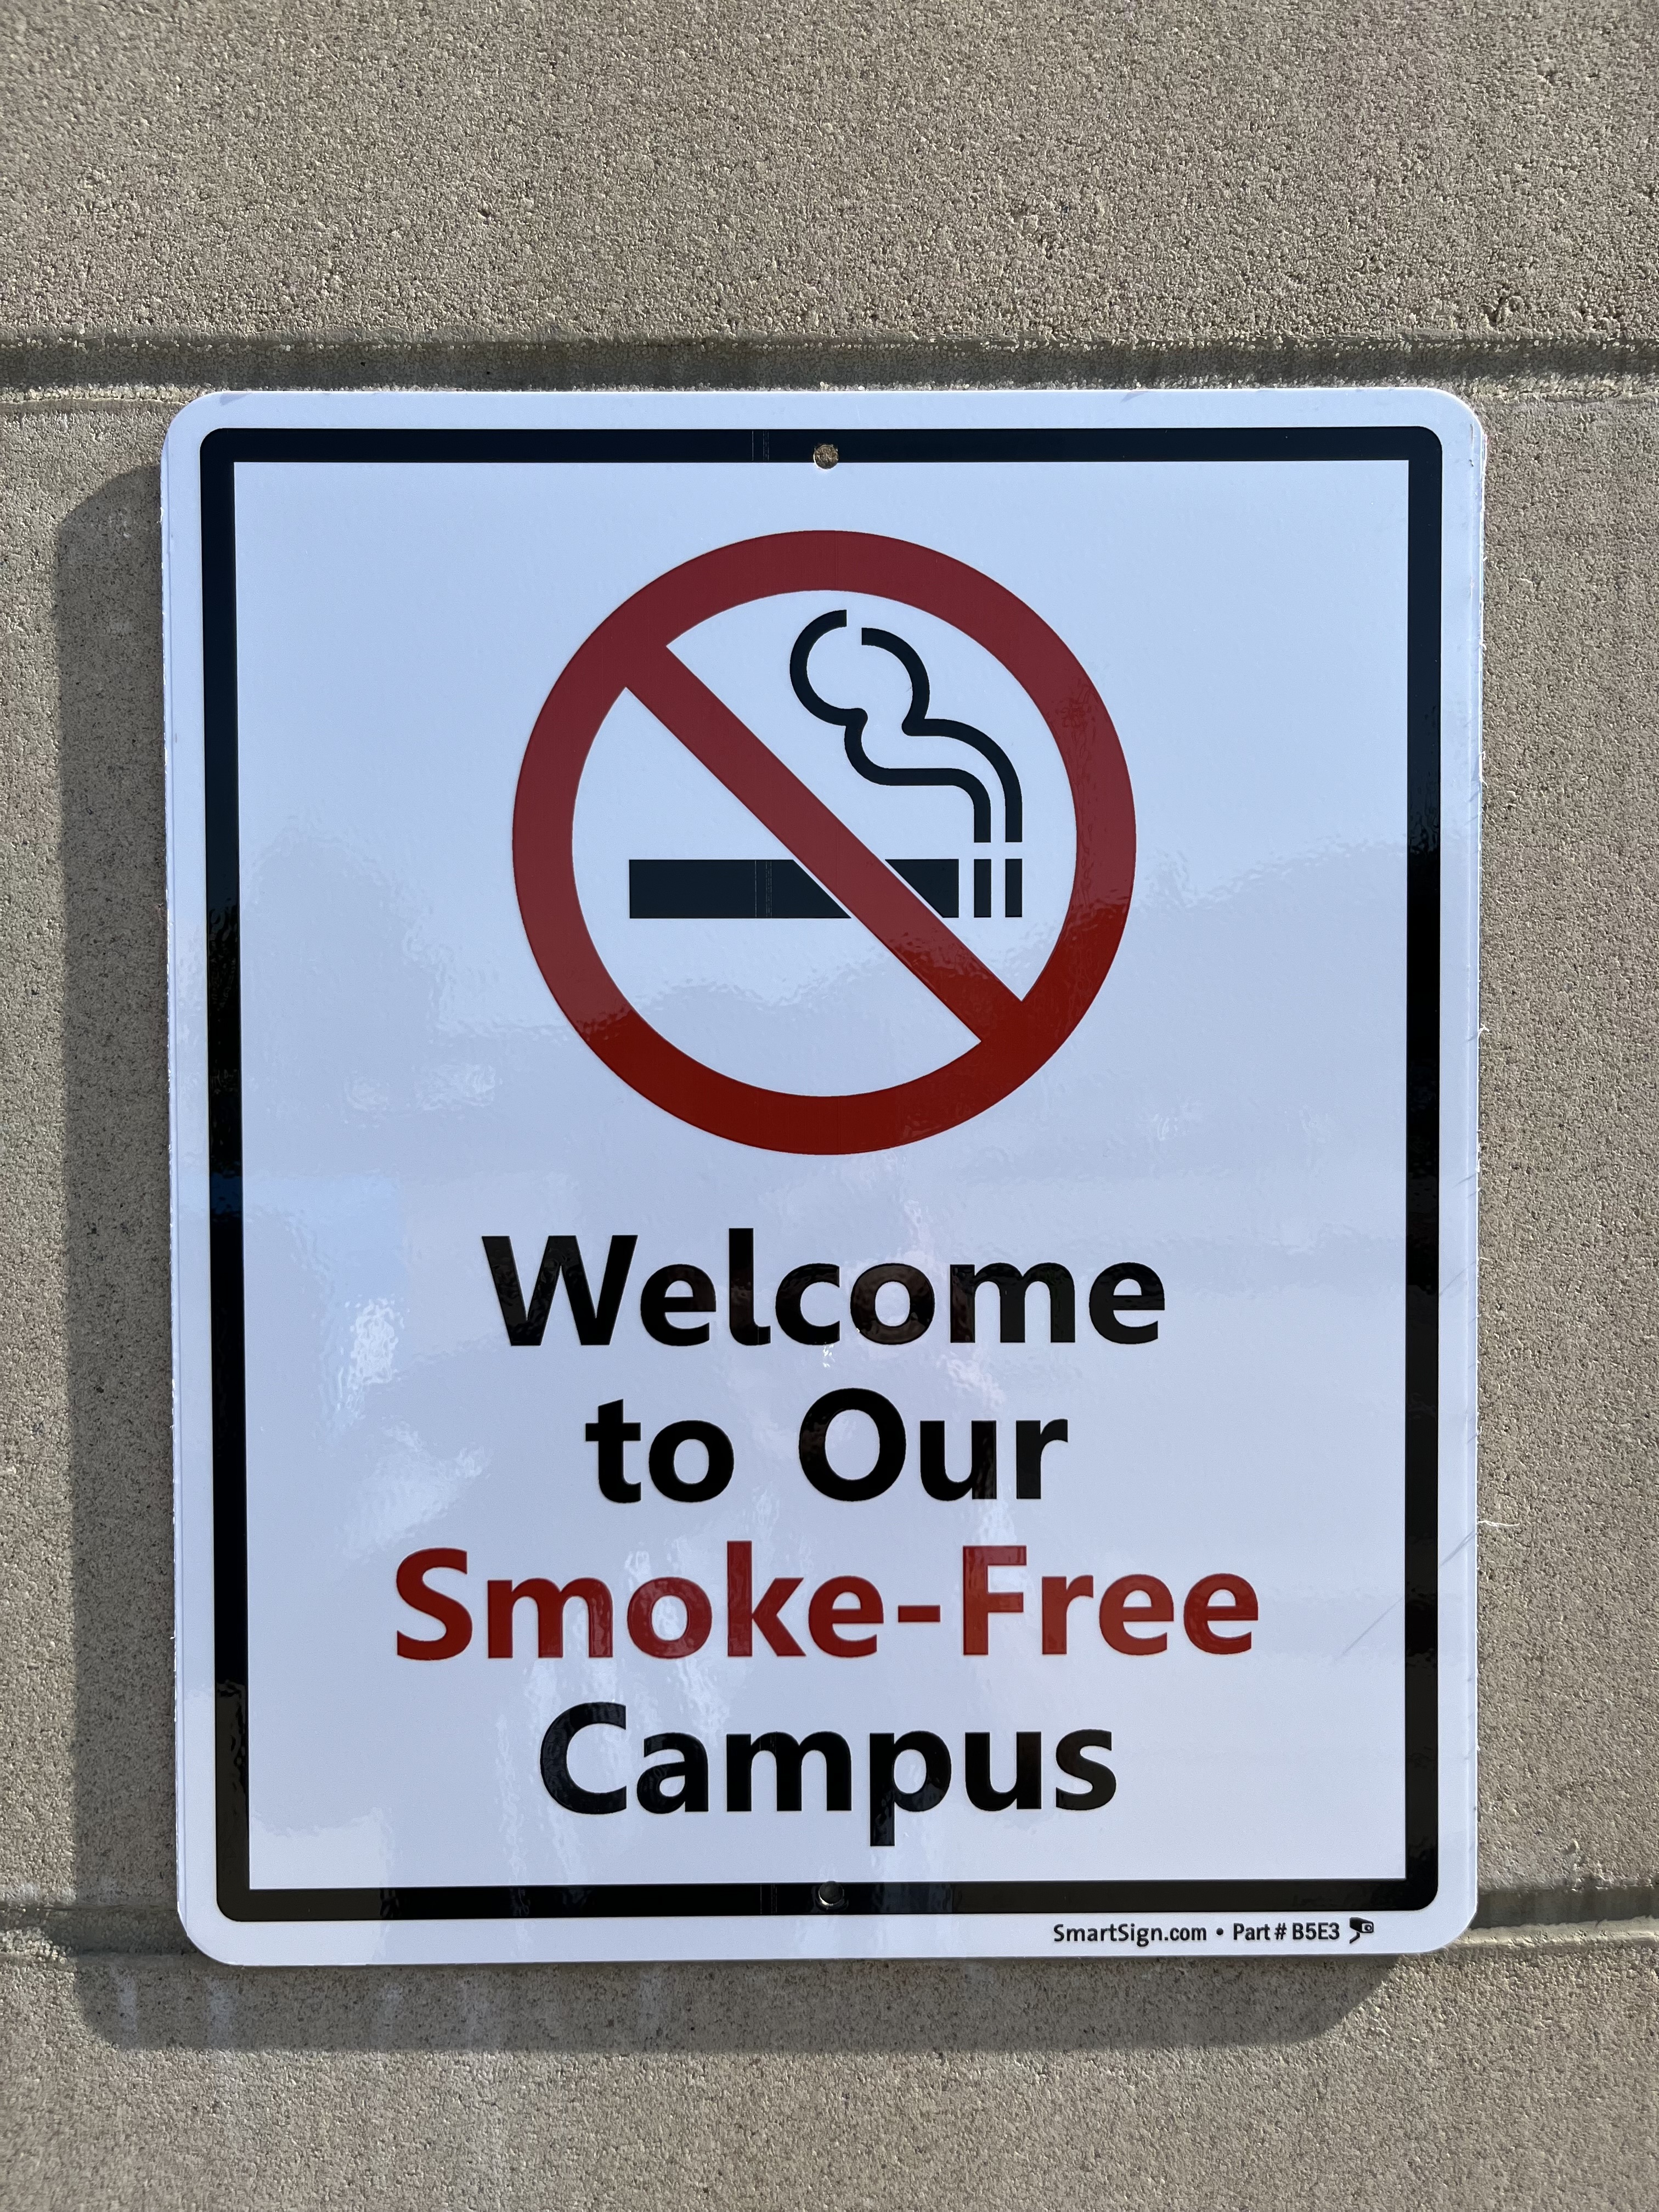 The Fond du Lac Public Library is now a smoke-free campus